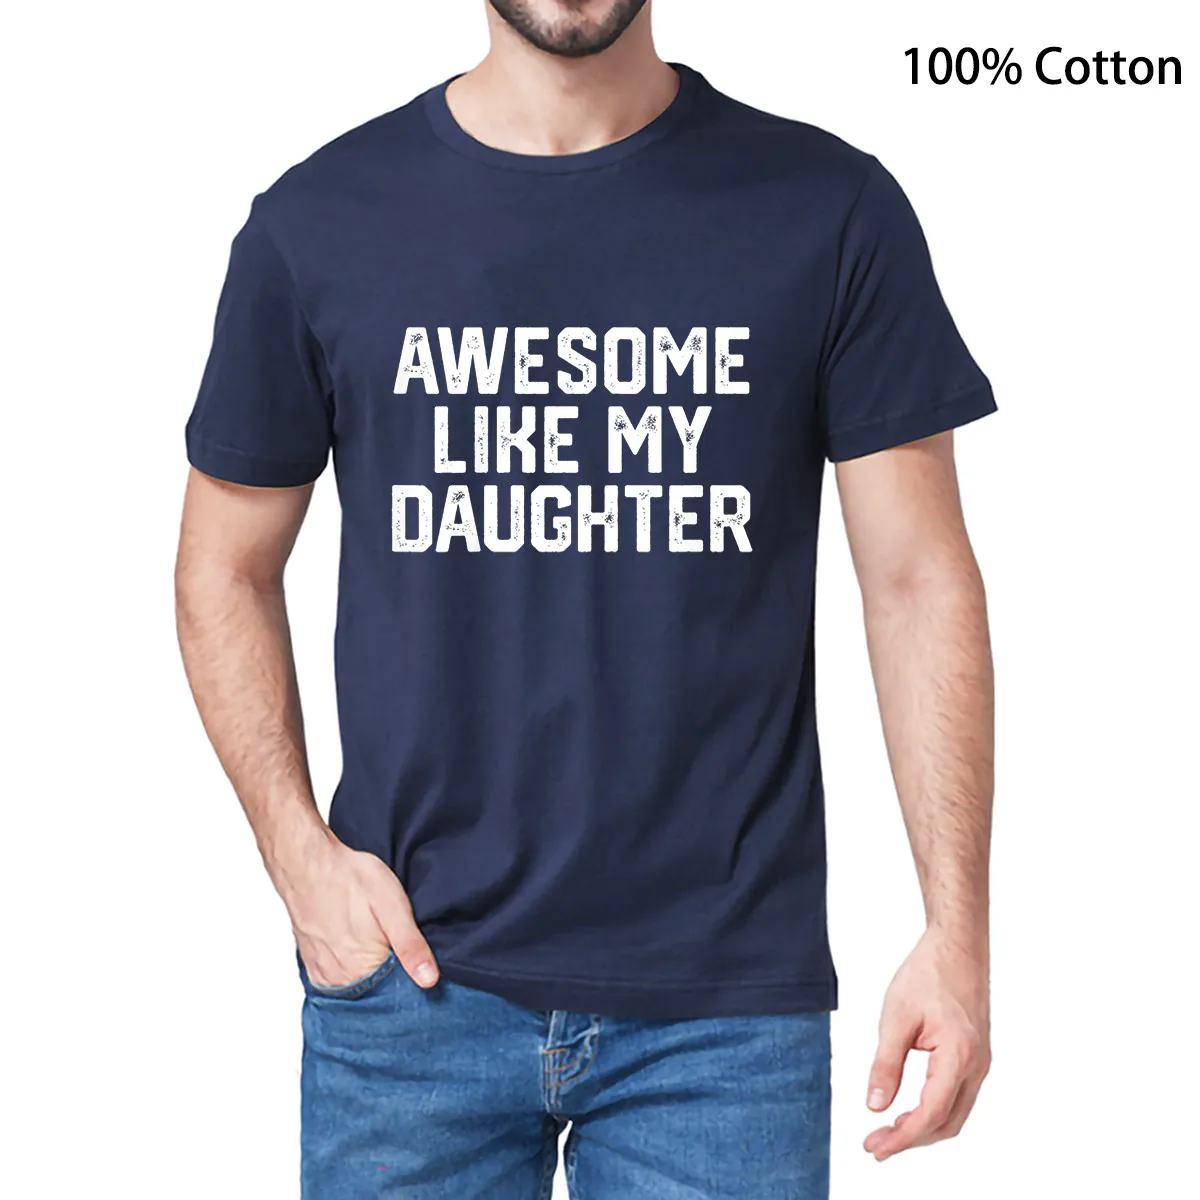 

100% Cotton AWESOME LIKE MY DAUGHTER Funny Father's Day Gift Dad Joke Men's Casual T-Shirt Streetwear Harajuku Summer Soft Tee